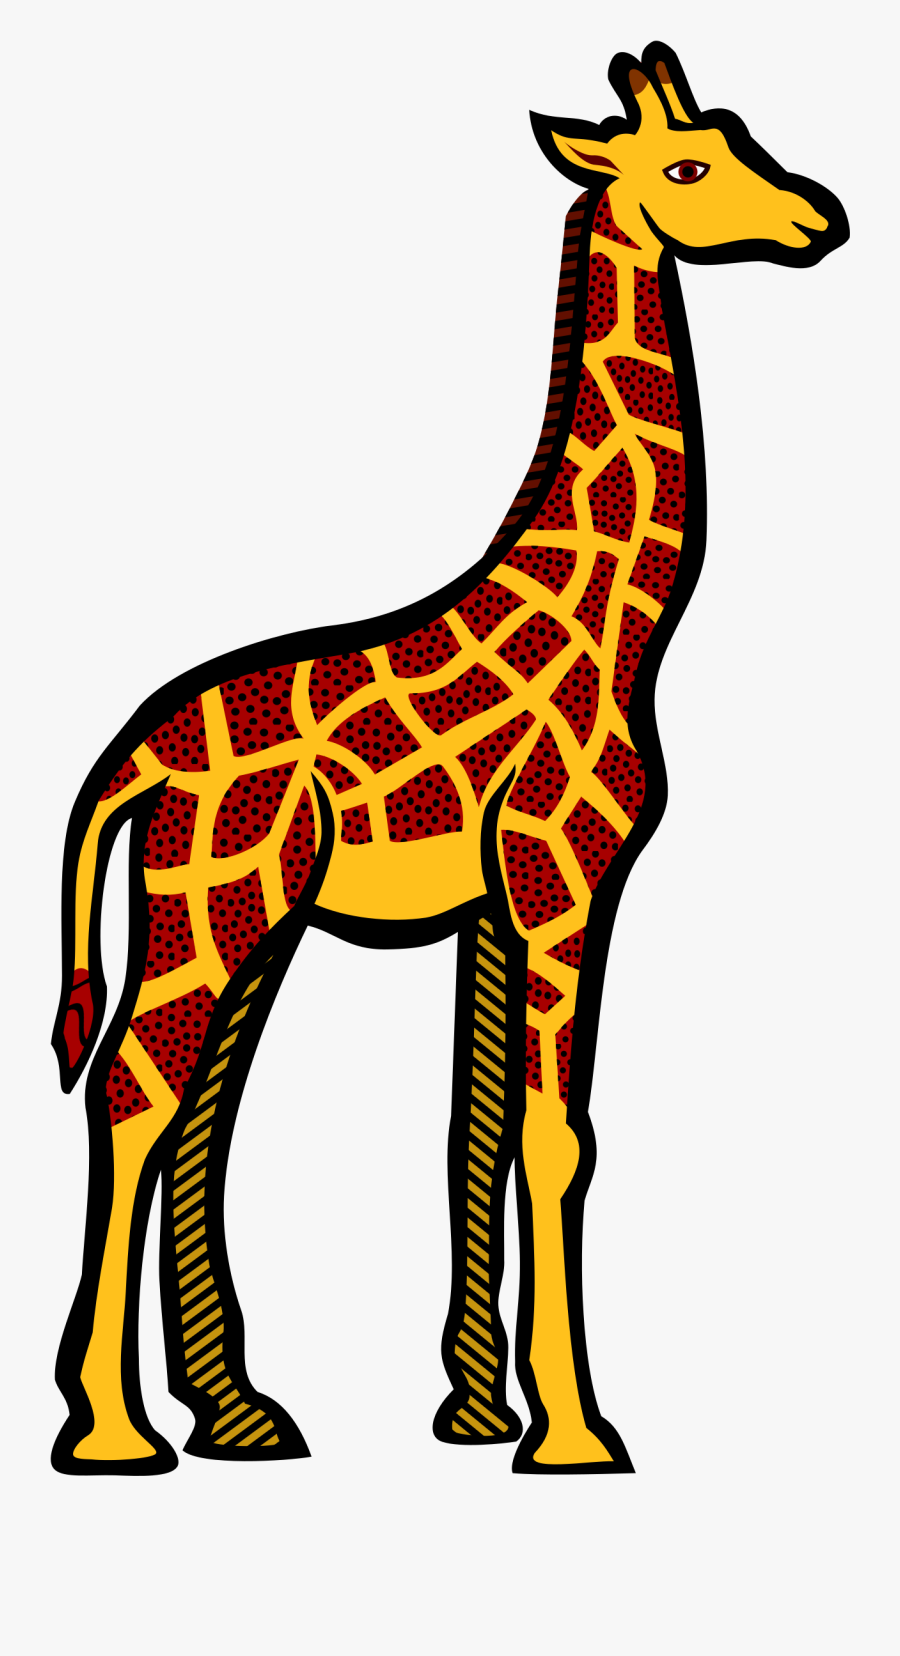 Coloured Big Image Png - Coloured Picture Of Giraffe, Transparent Clipart